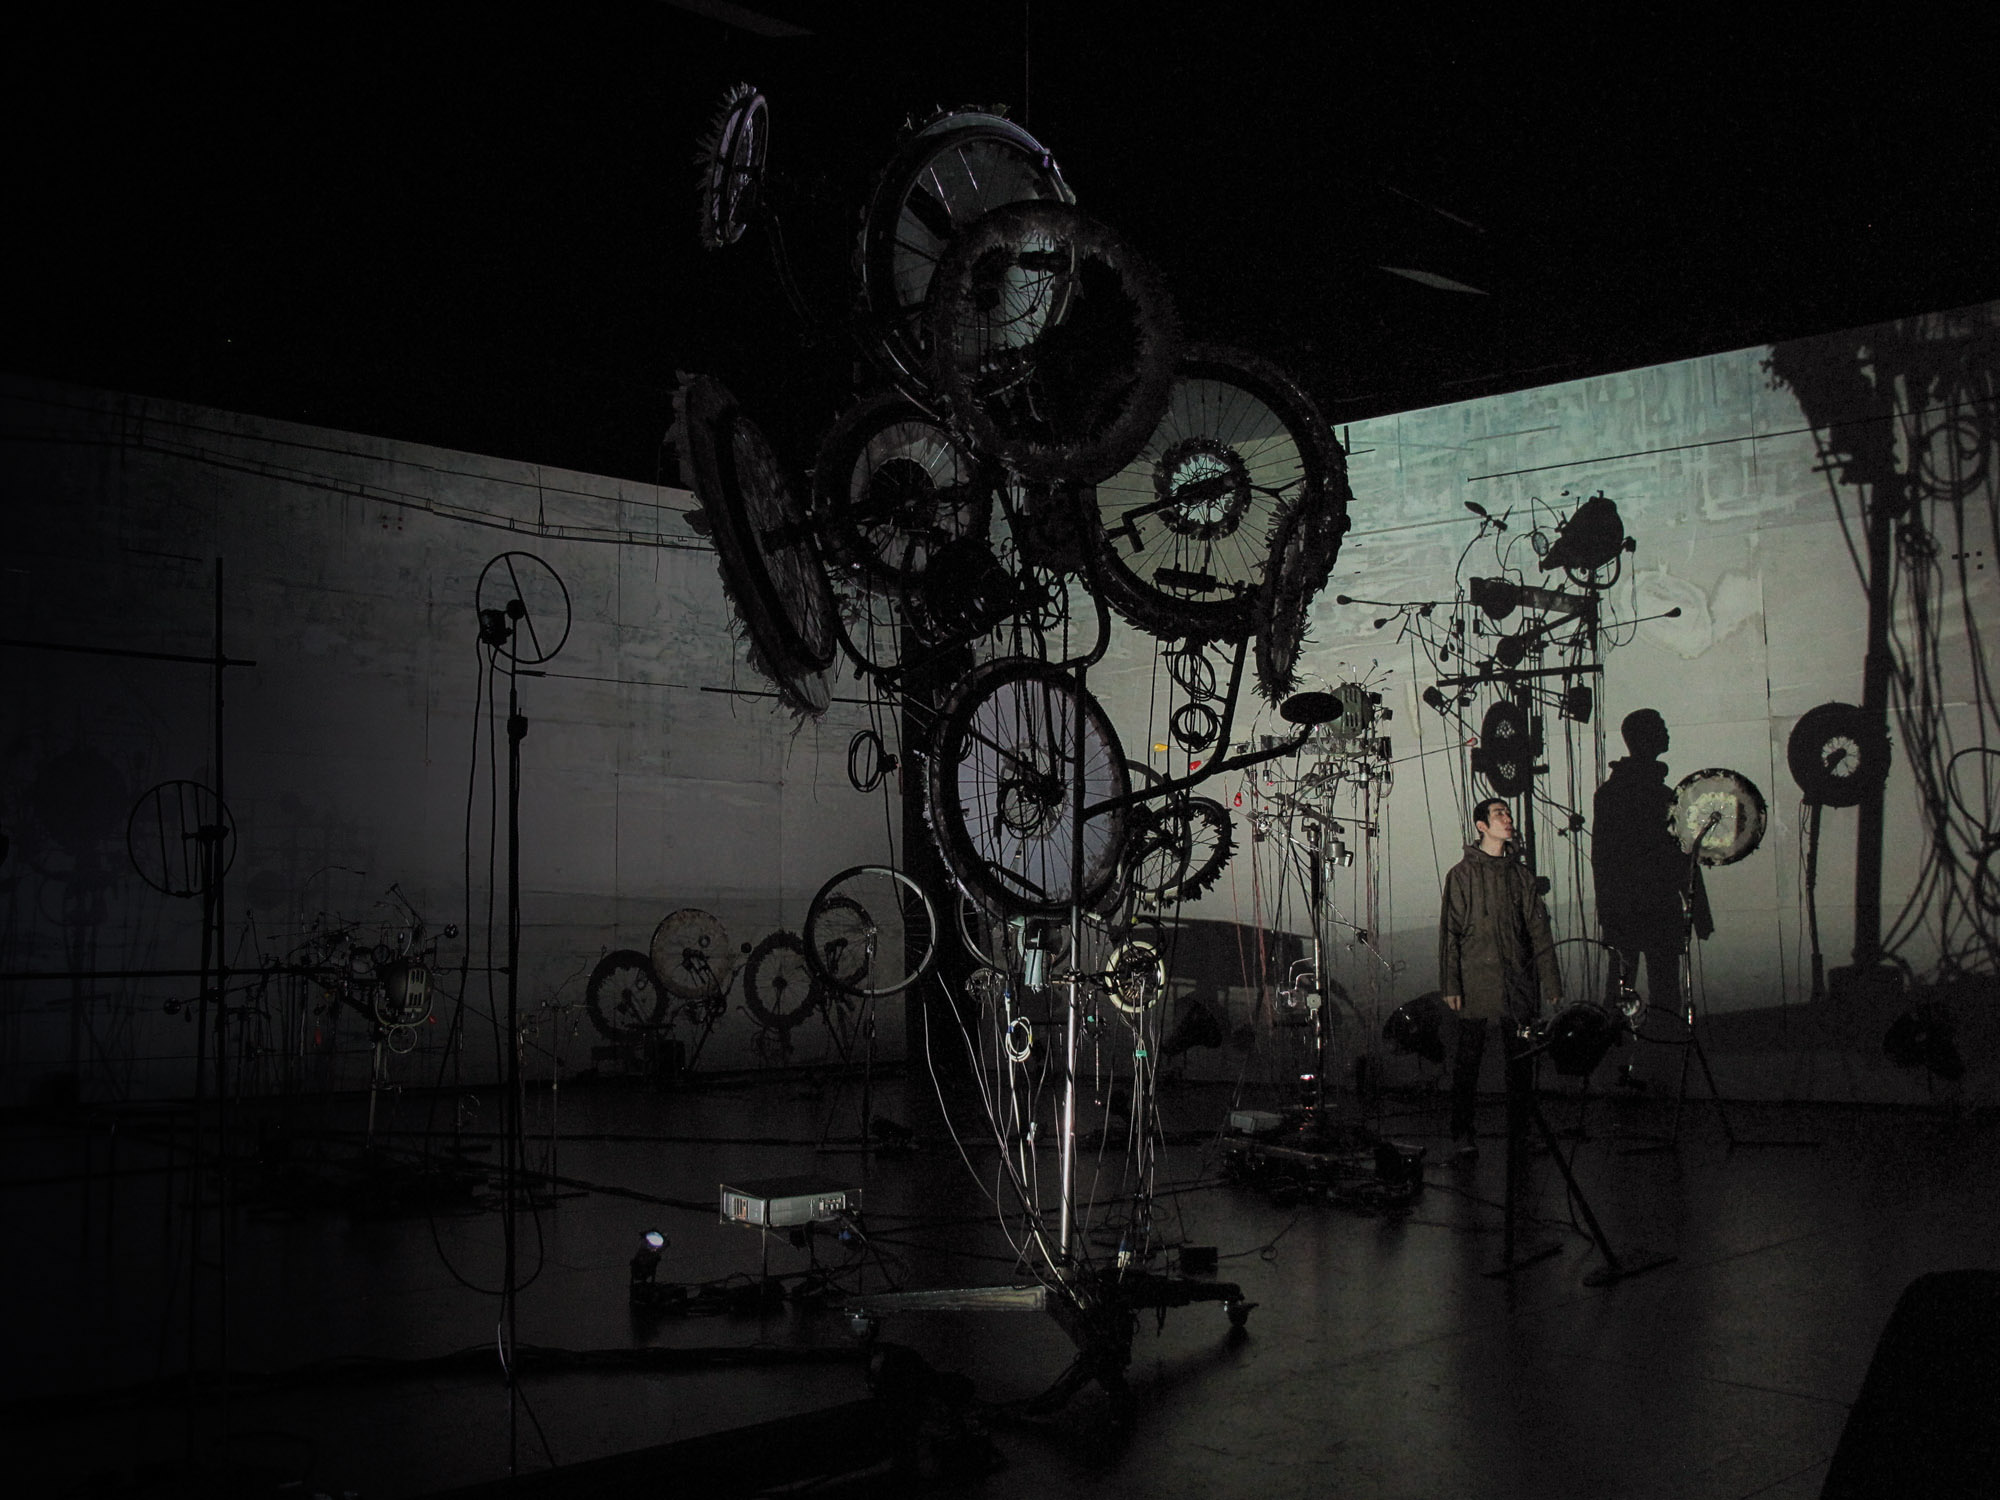 A man casting a shadow standing amongst an abstract sculpture of various wheels in a moody gray room. 